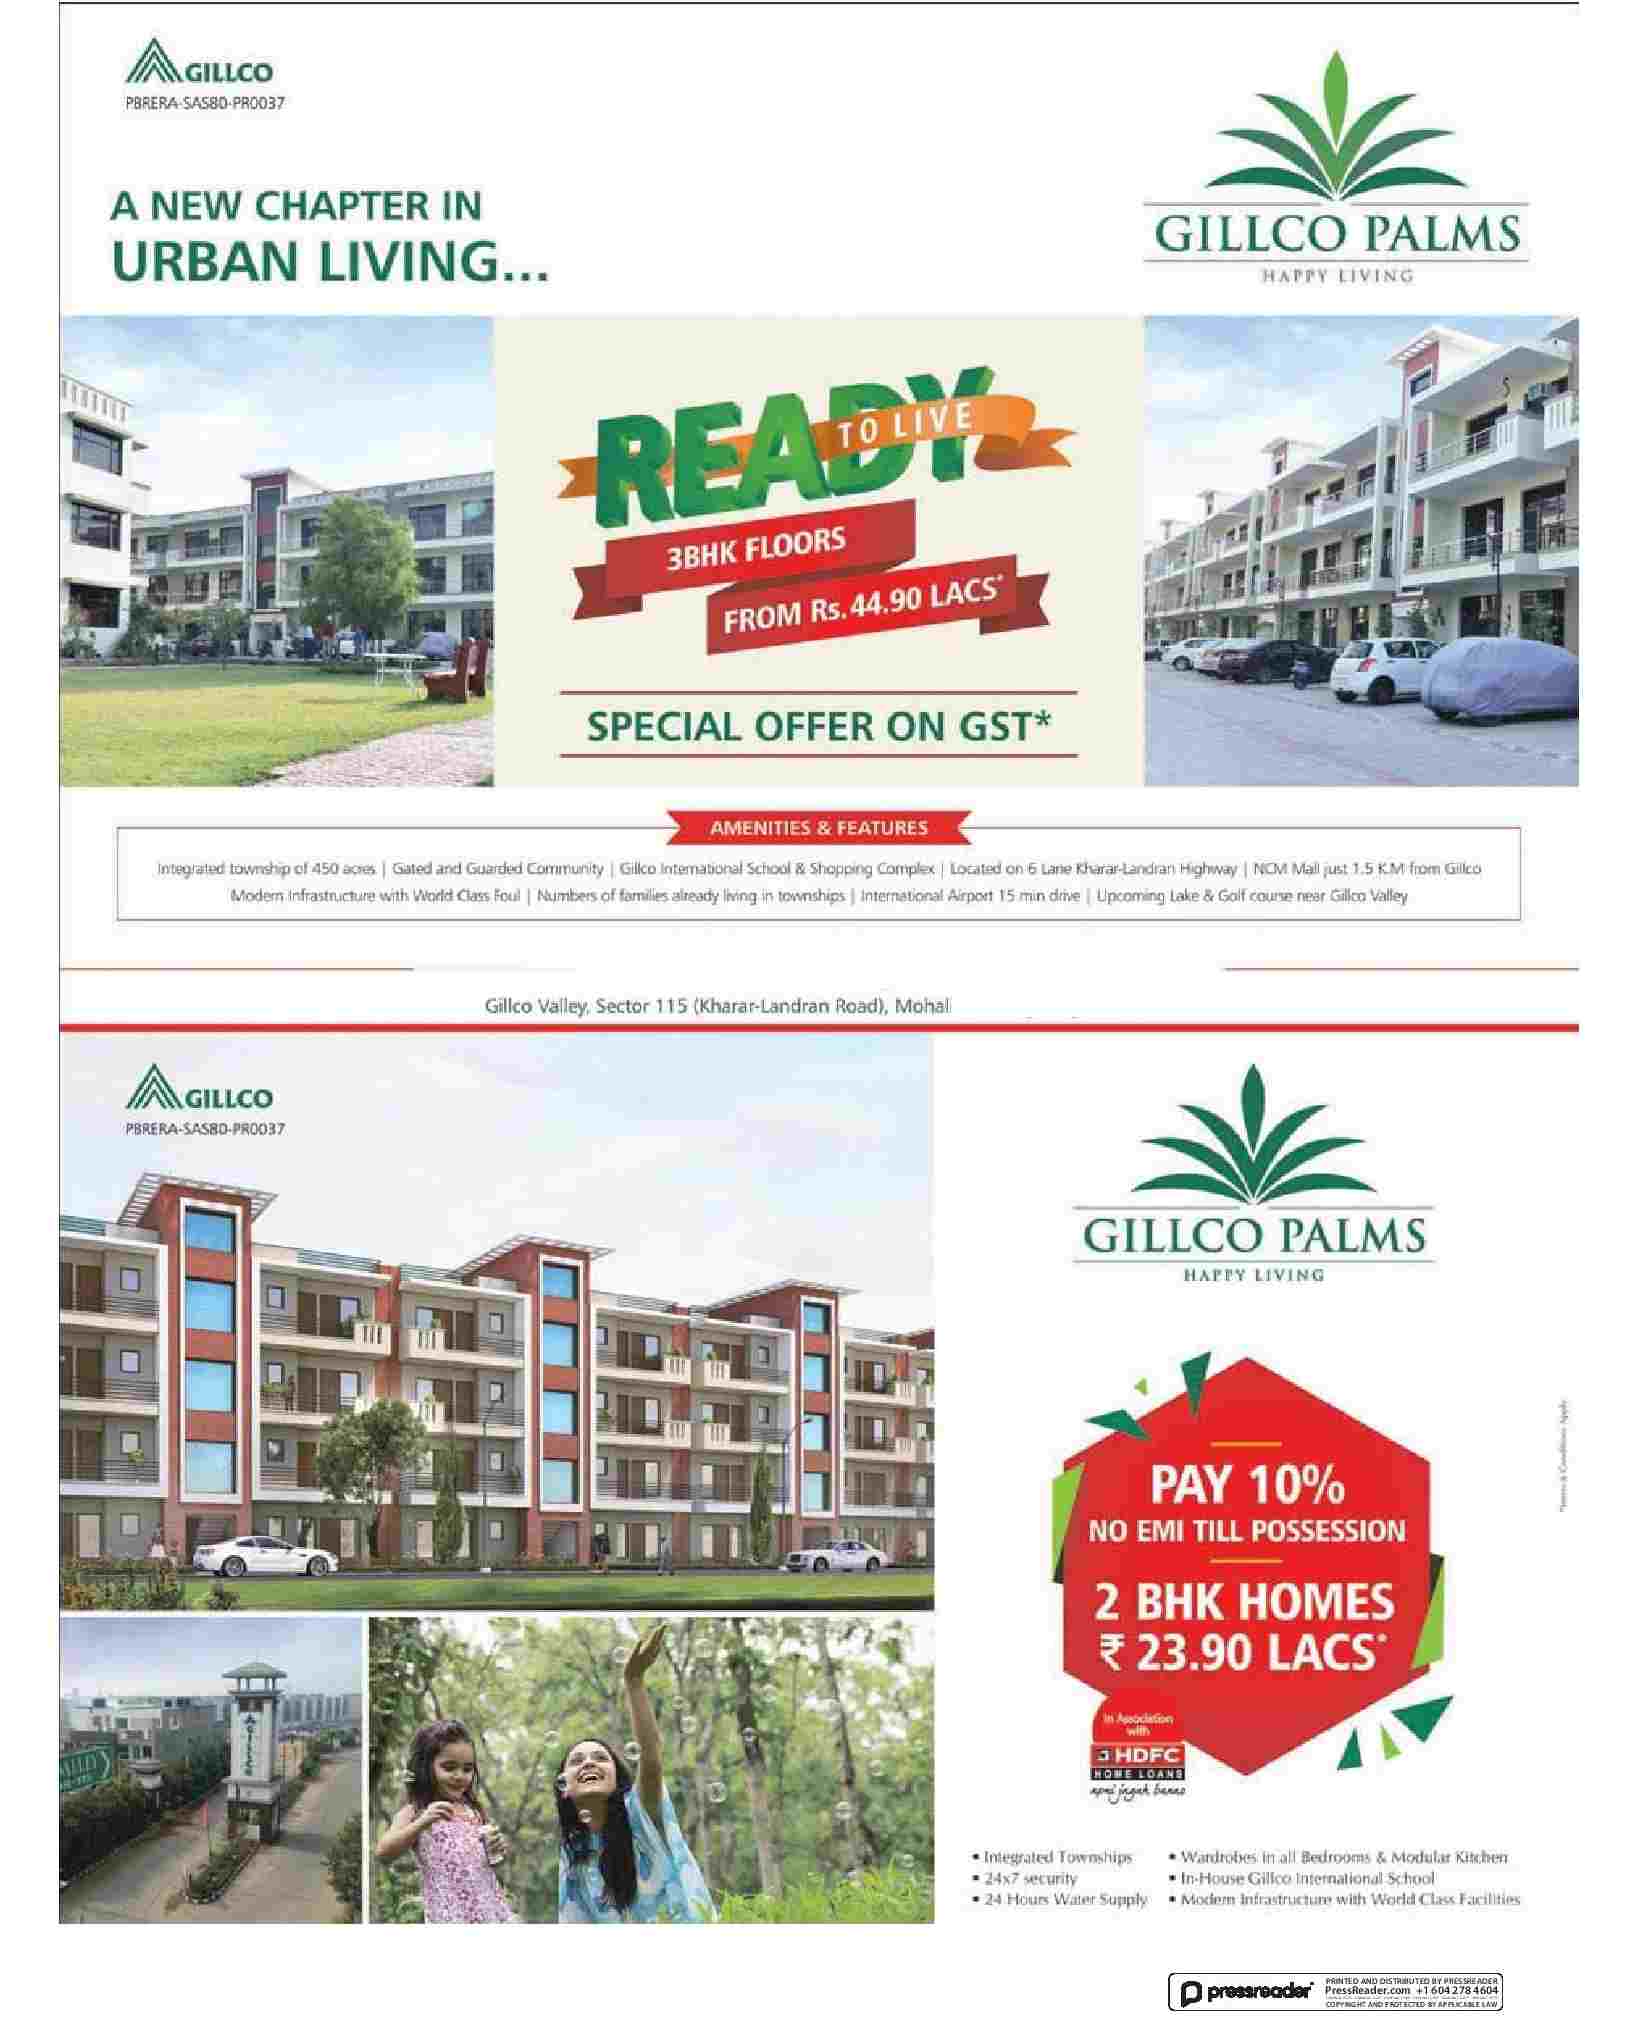 A new chapter of urban living is ready to live at Gillco Palms in Mohali Update